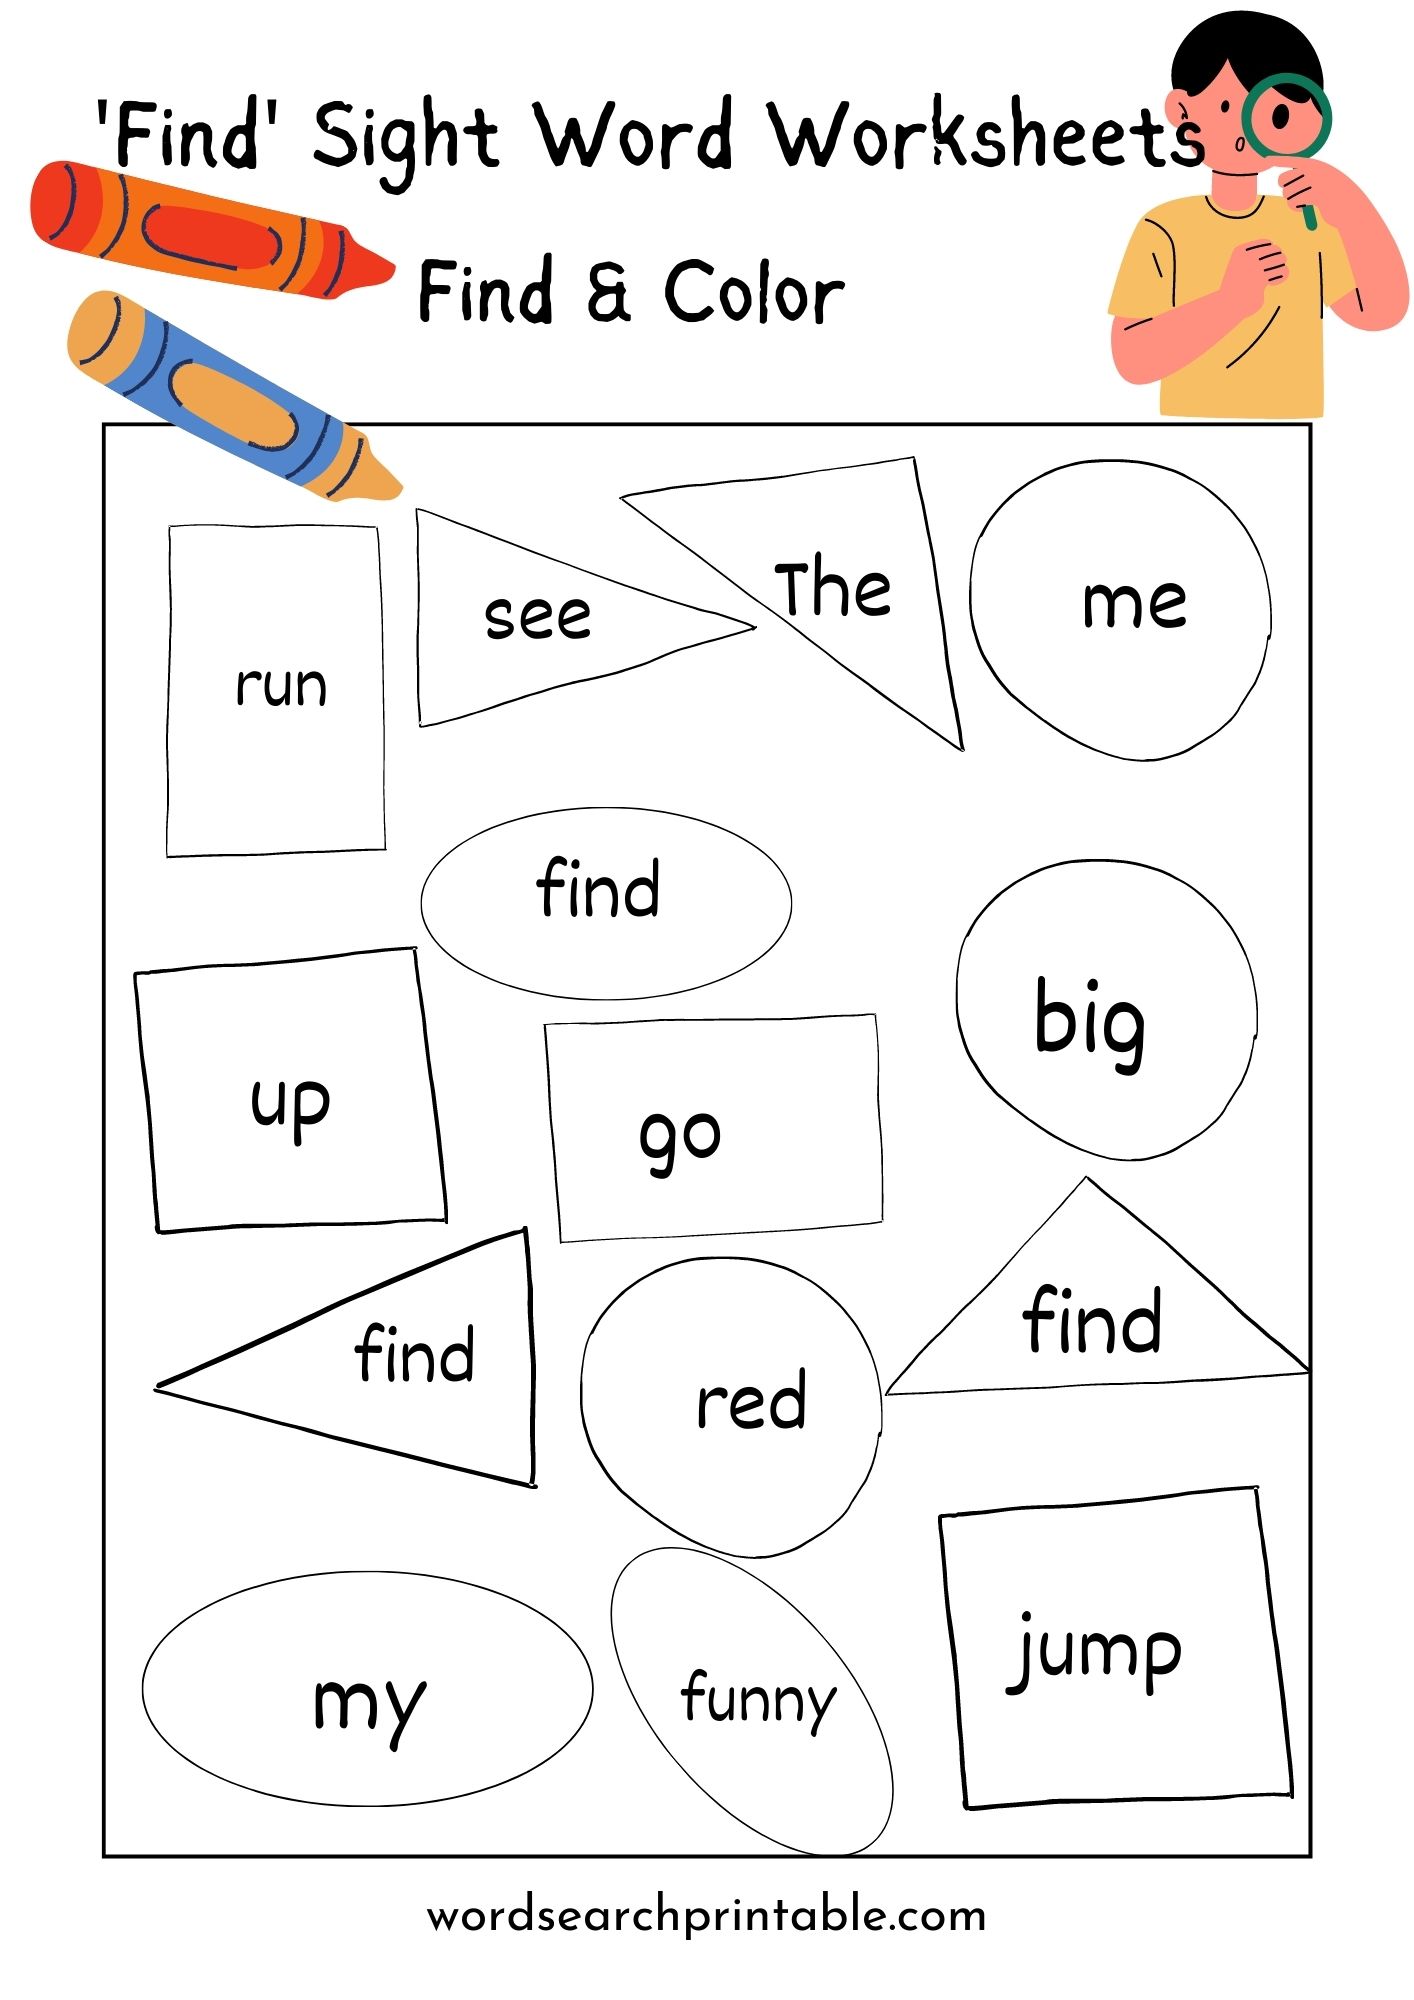 Find ‘Find’ and Color the geometric shape